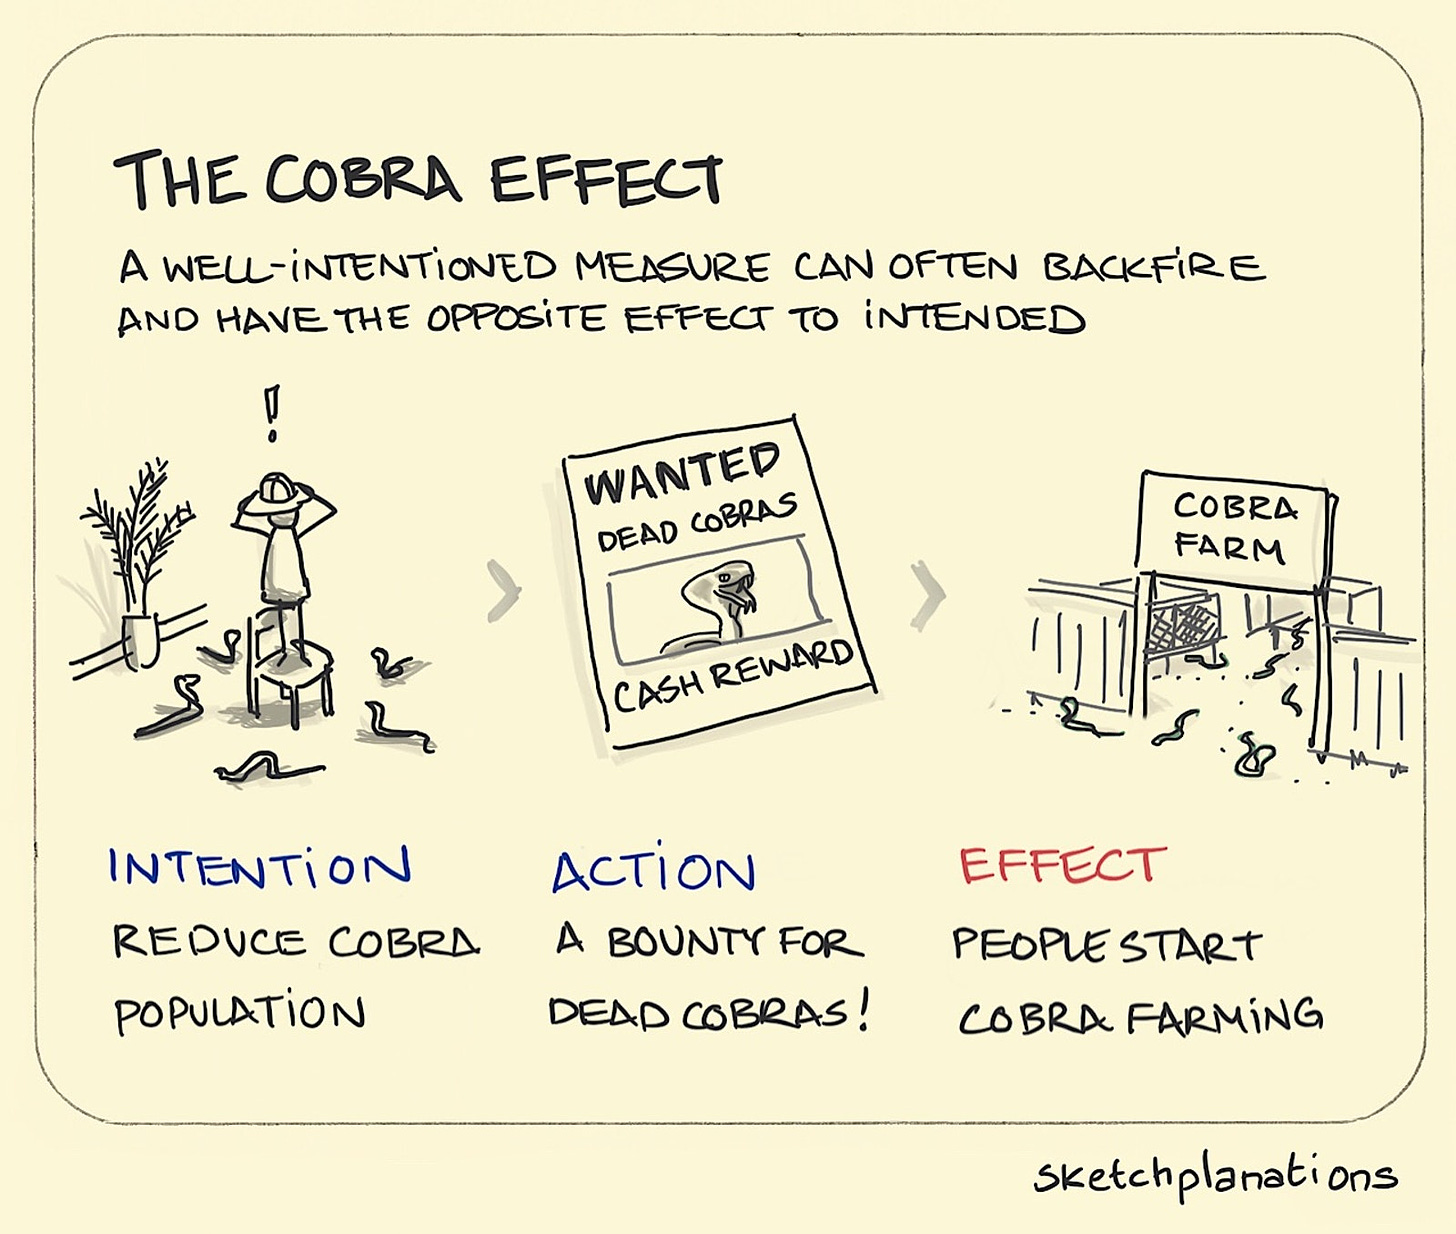 The cobra effect - Sketchplanations